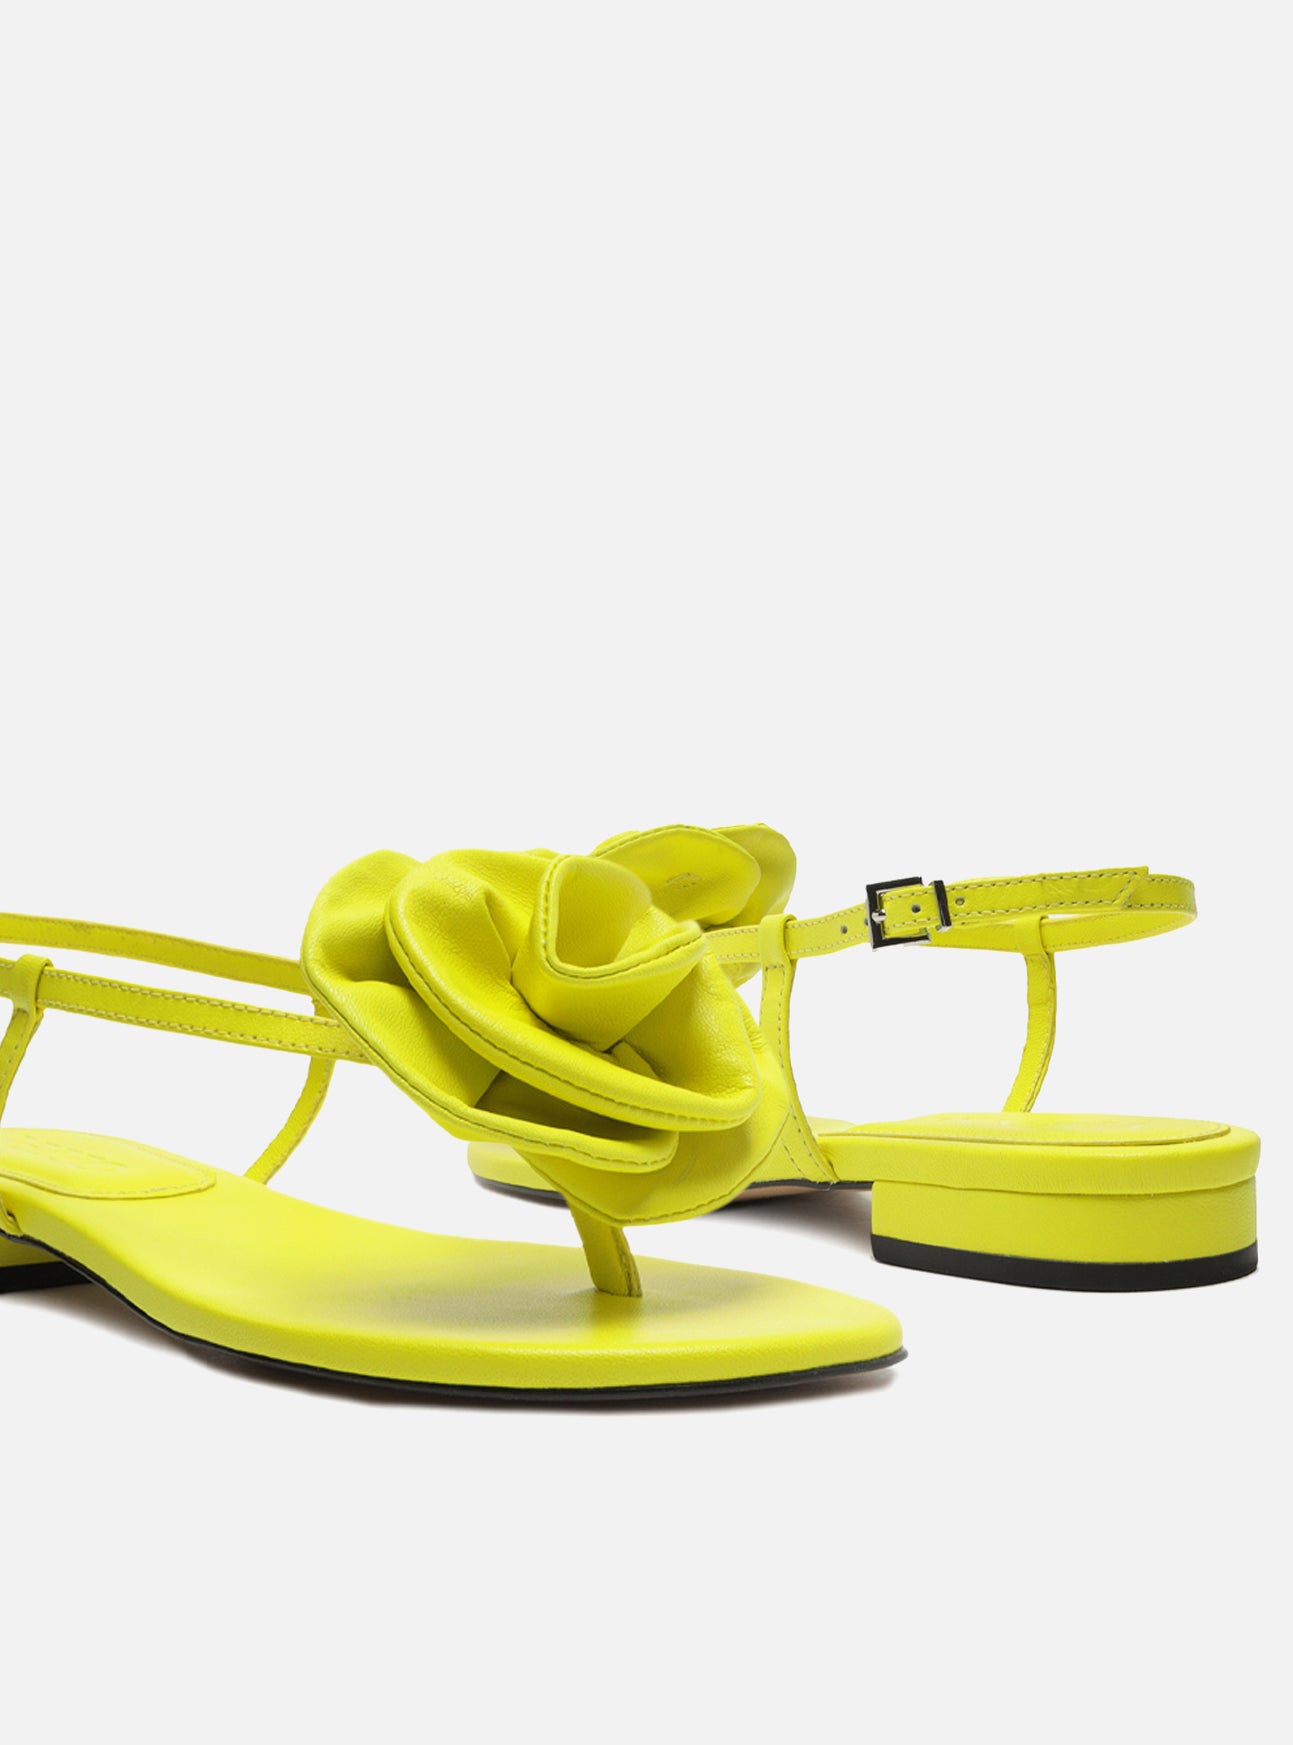 Rider | Shoes | Rider Sandals Bright Yellow Womens Size 85 Mens Size 7 |  Poshmark